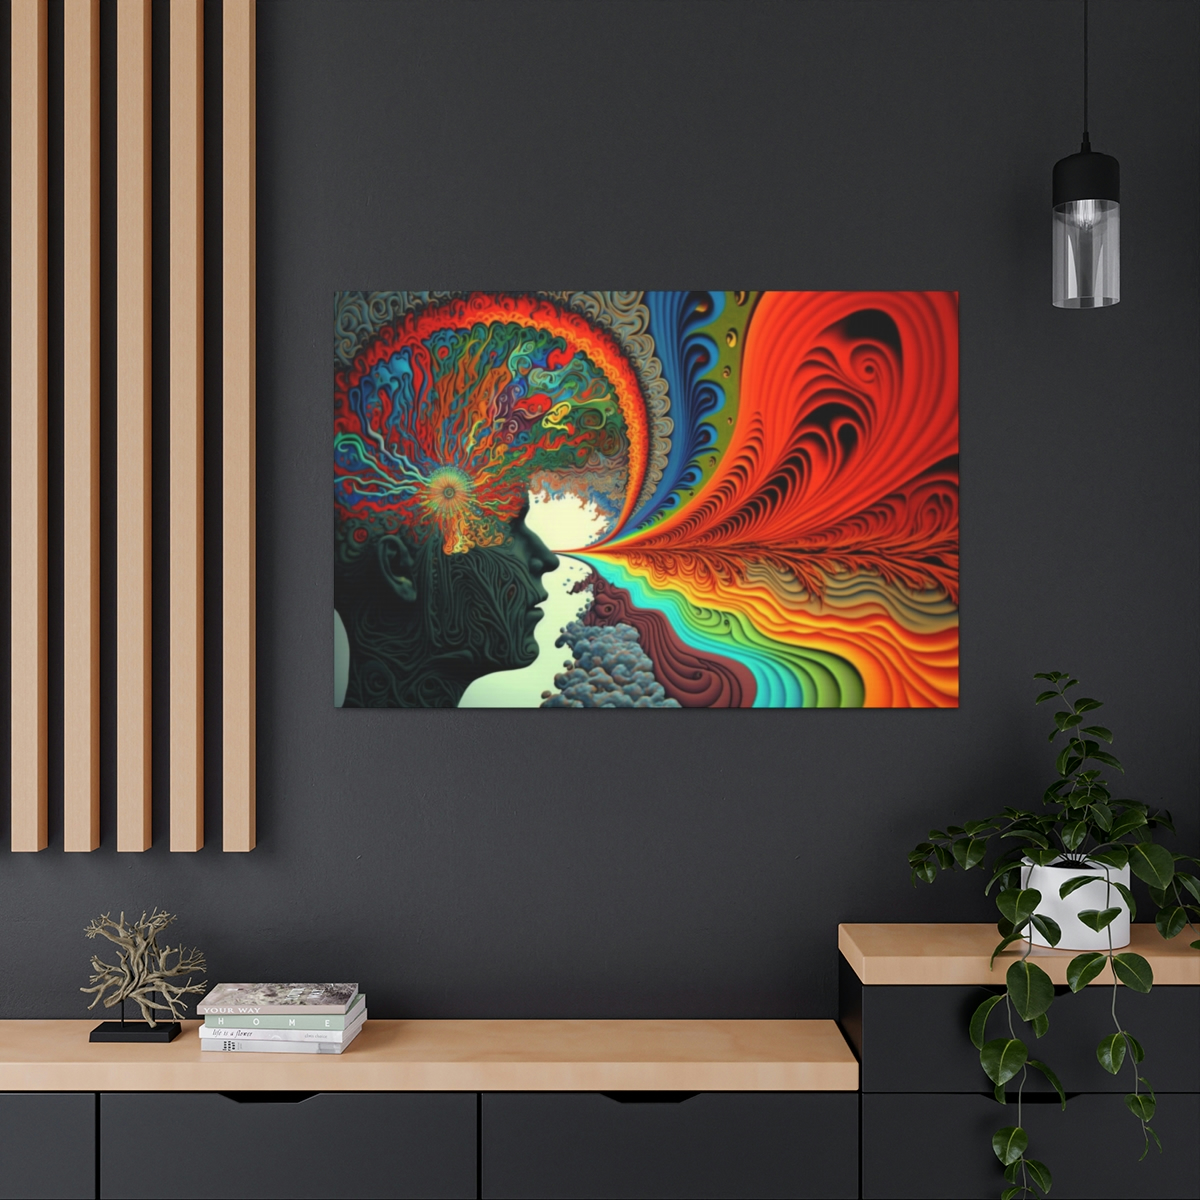 Trippy Art Canvas Print: The Power of Imagination